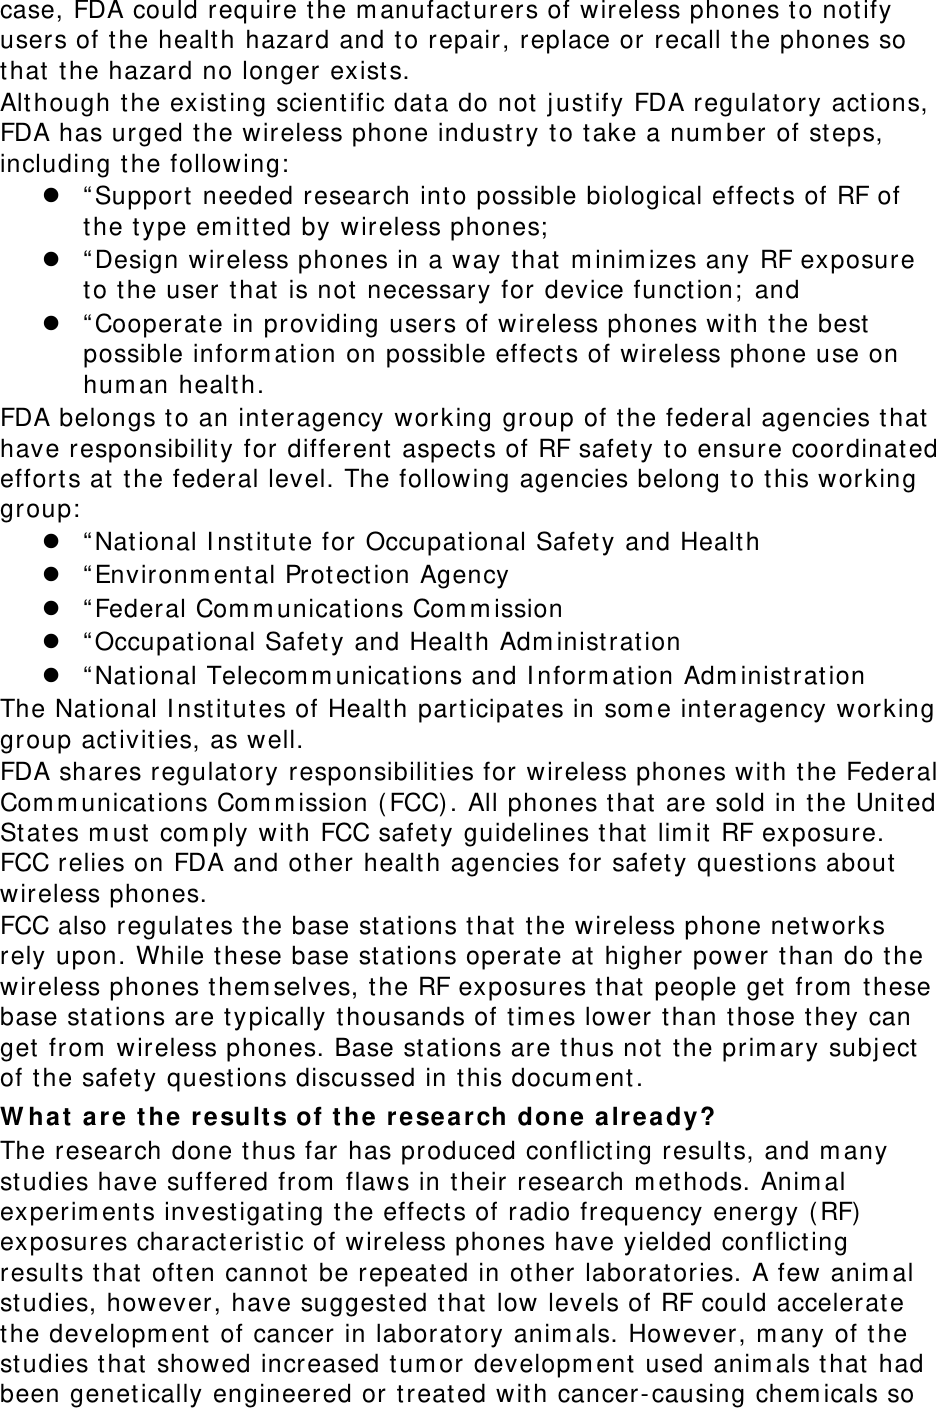 case, FDA could require t he m anufact urers of wireless phones t o notify users of the healt h hazard and to repair, replace or recall t he phones so that  the hazard no longer exist s. Alt hough t he exist ing scient ific dat a do not  justify FDA regulat or y act ions, FDA has urged t he wireless phone indust ry t o t ake a num ber of st eps, including t he following:   “ Support  needed research int o possible biological effects of RF of the t ype em it t ed by wireless phones;   “ Design wireless phones in a way t hat  m inim izes any RF exposure to t he user t hat  is not  necessary for device funct ion;  and  “ Cooperat e in providing users of wireless phones wit h t he best possible inform at ion on possible effect s of wireless phone use on hum an healt h. FDA belongs t o an interagency working group of t he federal agencies that  have responsibilit y for different aspect s of RF safet y t o ensure coordinated effort s at the federal level. The following agencies belong t o this working group:   “ Nat ional I nst itut e for Occupat ional Safet y and Healt h  “ Environm ent al Prot ect ion Agency  “ Federal Com m unicat ions Com m ission  “ Occupational Safet y and Health Adm inist r at ion  “ Nat ional Telecom m unicat ions and I nform at ion Adm inist r at ion The National I nstit ut es of Healt h part icipat es in som e int eragency working group act ivit ies, as well. FDA shares regulatory r esponsibilit ies for wireless phones wit h t he Federal Com m unicat ions Com m ission ( FCC). All phones that  are sold in t he Unit ed St at es m ust  com ply  with FCC safety guidelines t hat lim it RF exposure. FCC relies on FDA and ot her healt h agencies for safety questions about wireless phones. FCC also regulat es t he base st at ions t hat the wireless phone networks rely upon. While t hese base st at ions operat e at higher power t han do the wireless phones t hem selves, t he RF exposures t hat people get  from  these base stat ions are t ypically thousands of tim es lower t han those t hey can get  from  wireless phones. Base st ations are thus not  t he prim ary subj ect  of t he safet y quest ions discussed in t his docum ent . W ha t  a re t he  re sult s of t he re se a rch  done a lrea dy? The research done thus far has produced conflict ing result s, and m any studies have suffered from  flaws in t heir research m et hods. Anim al experim ent s invest igat ing t he effects of radio frequency energy (RF)  exposures charact erist ic of wireless phones have yielded conflict ing result s t hat  oft en cannot  be repeated in other laborat ories. A few  anim al studies, however, have suggest ed t hat  low levels of RF could accelerat e the developm ent of cancer in laborat ory anim als. However, m any of t he studies t hat showed increased t um or developm ent  used anim als t hat  had been genetically engineered or t reated with cancer-causing chem icals so 